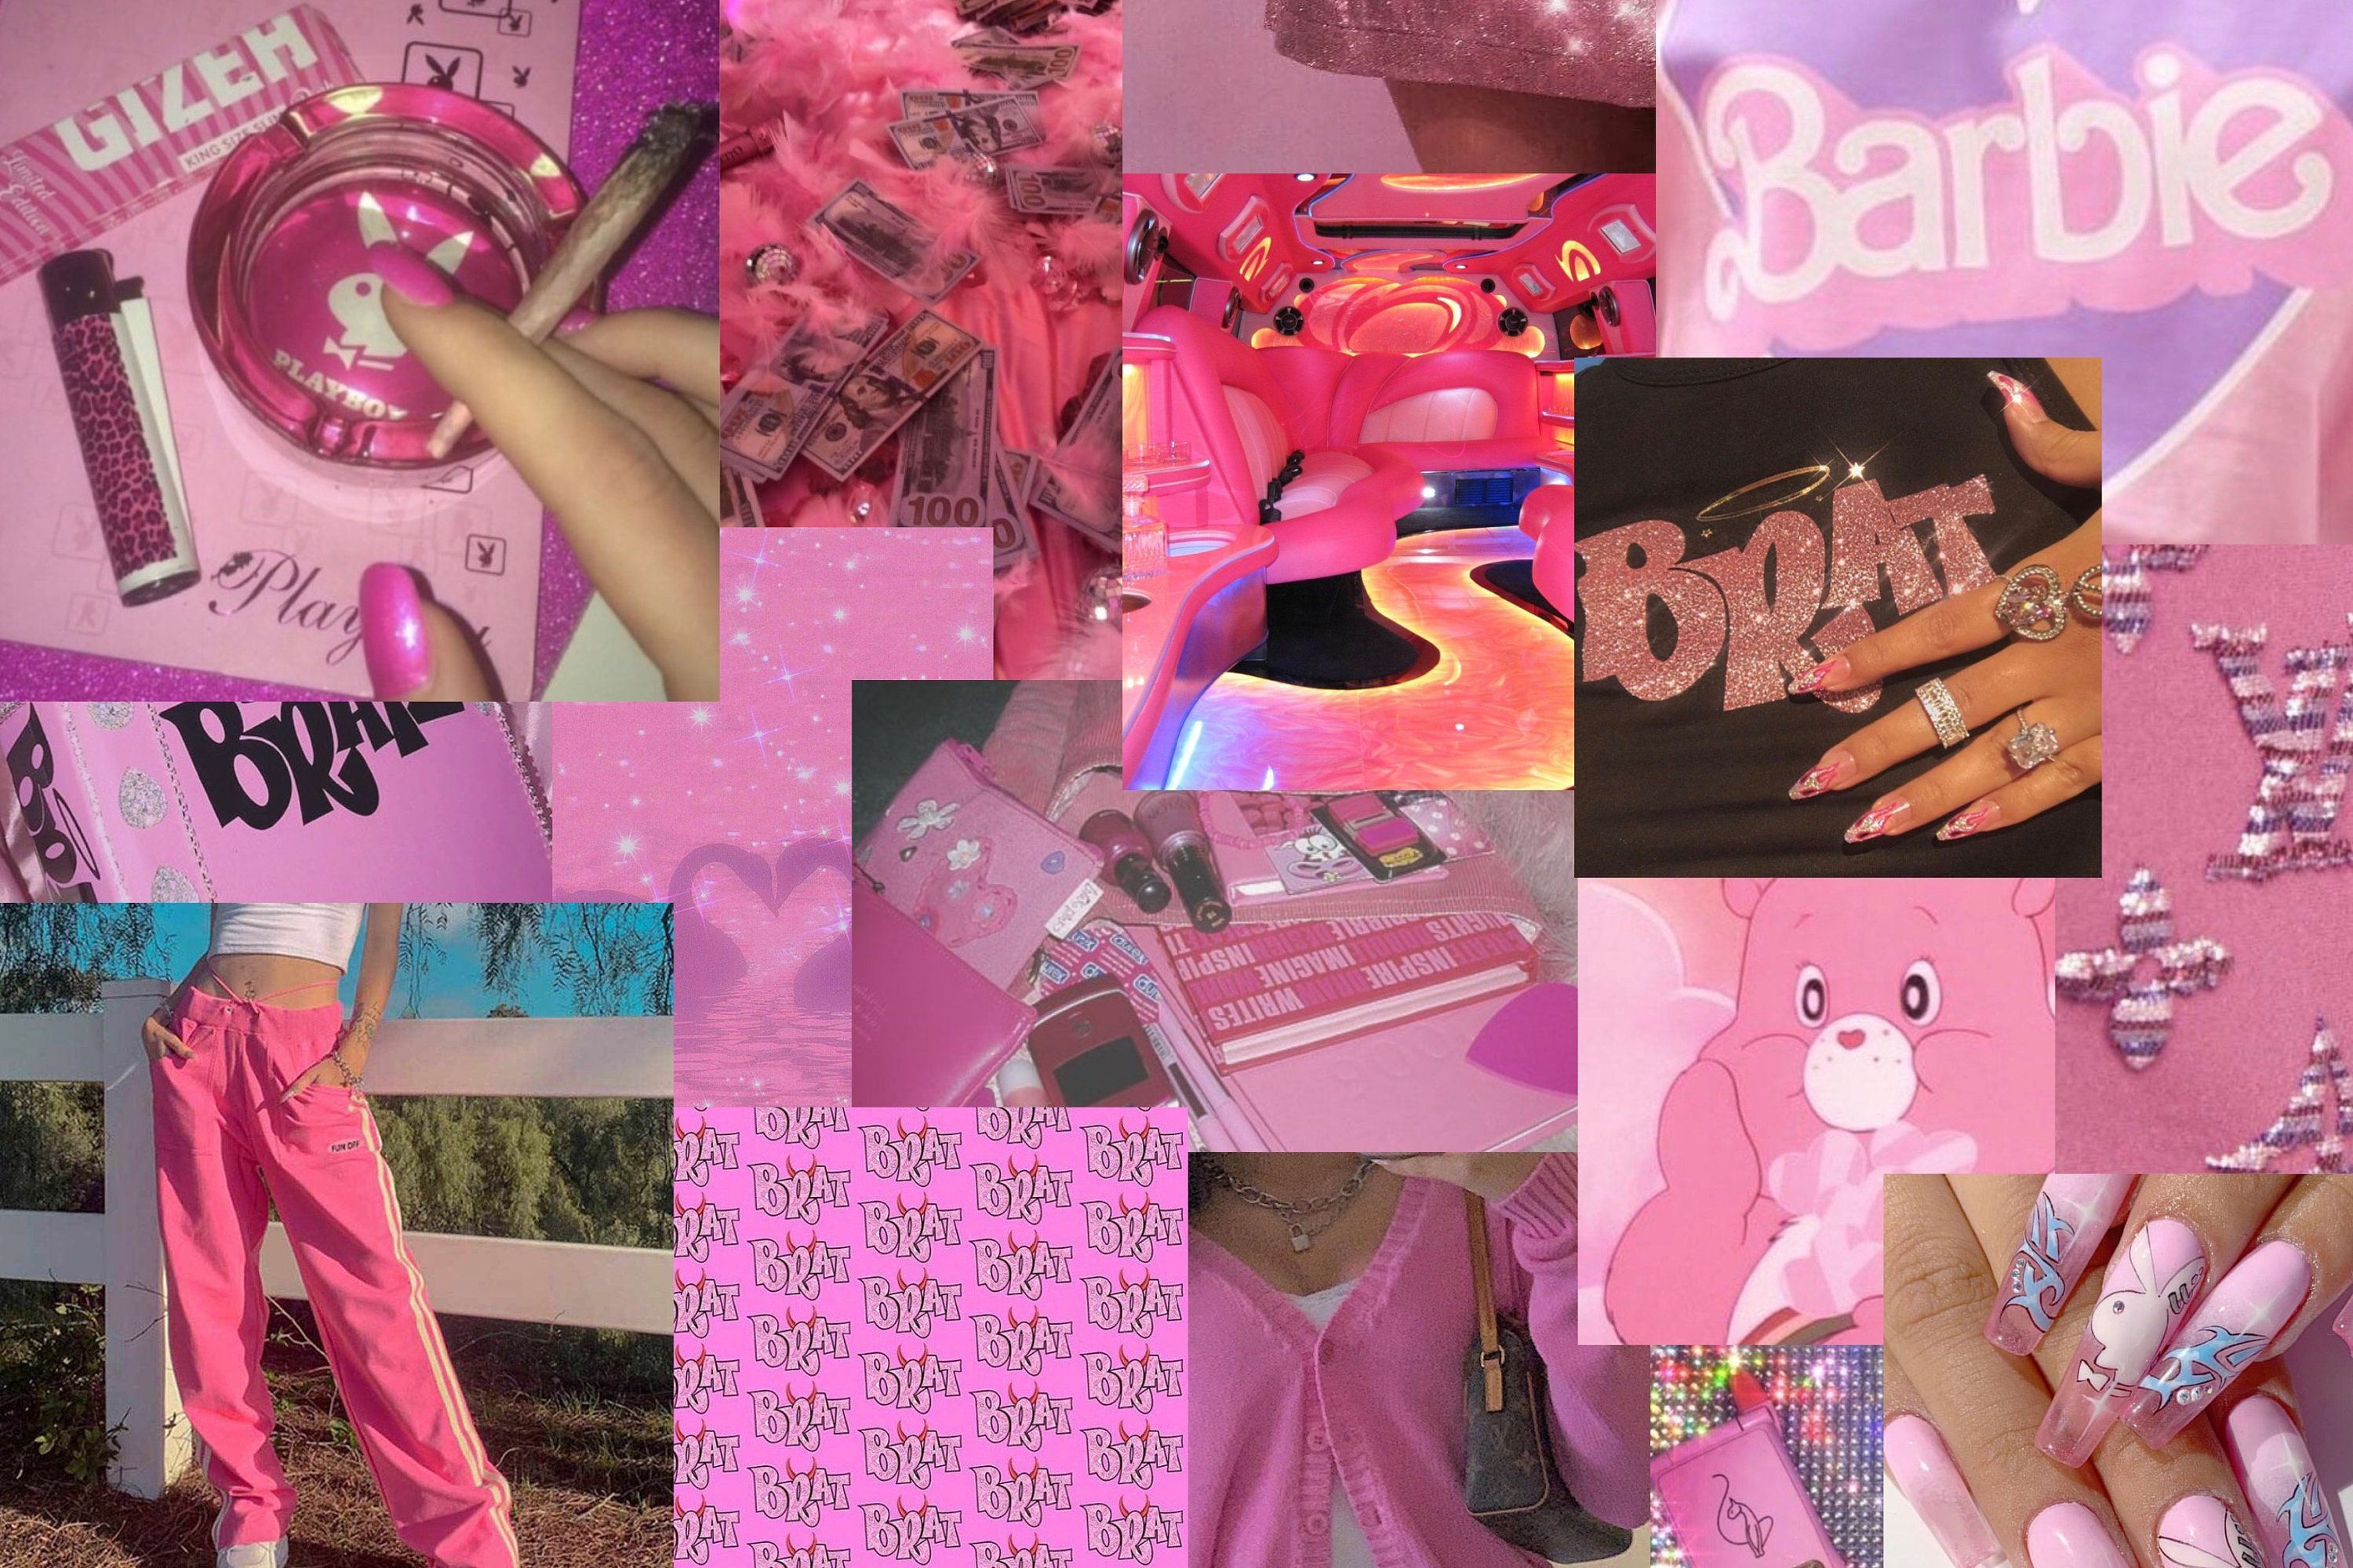 A collage of pink aesthetic images, including a pink Barbie logo, pink fluffy socks, and pink and white nail polish. - 2000s